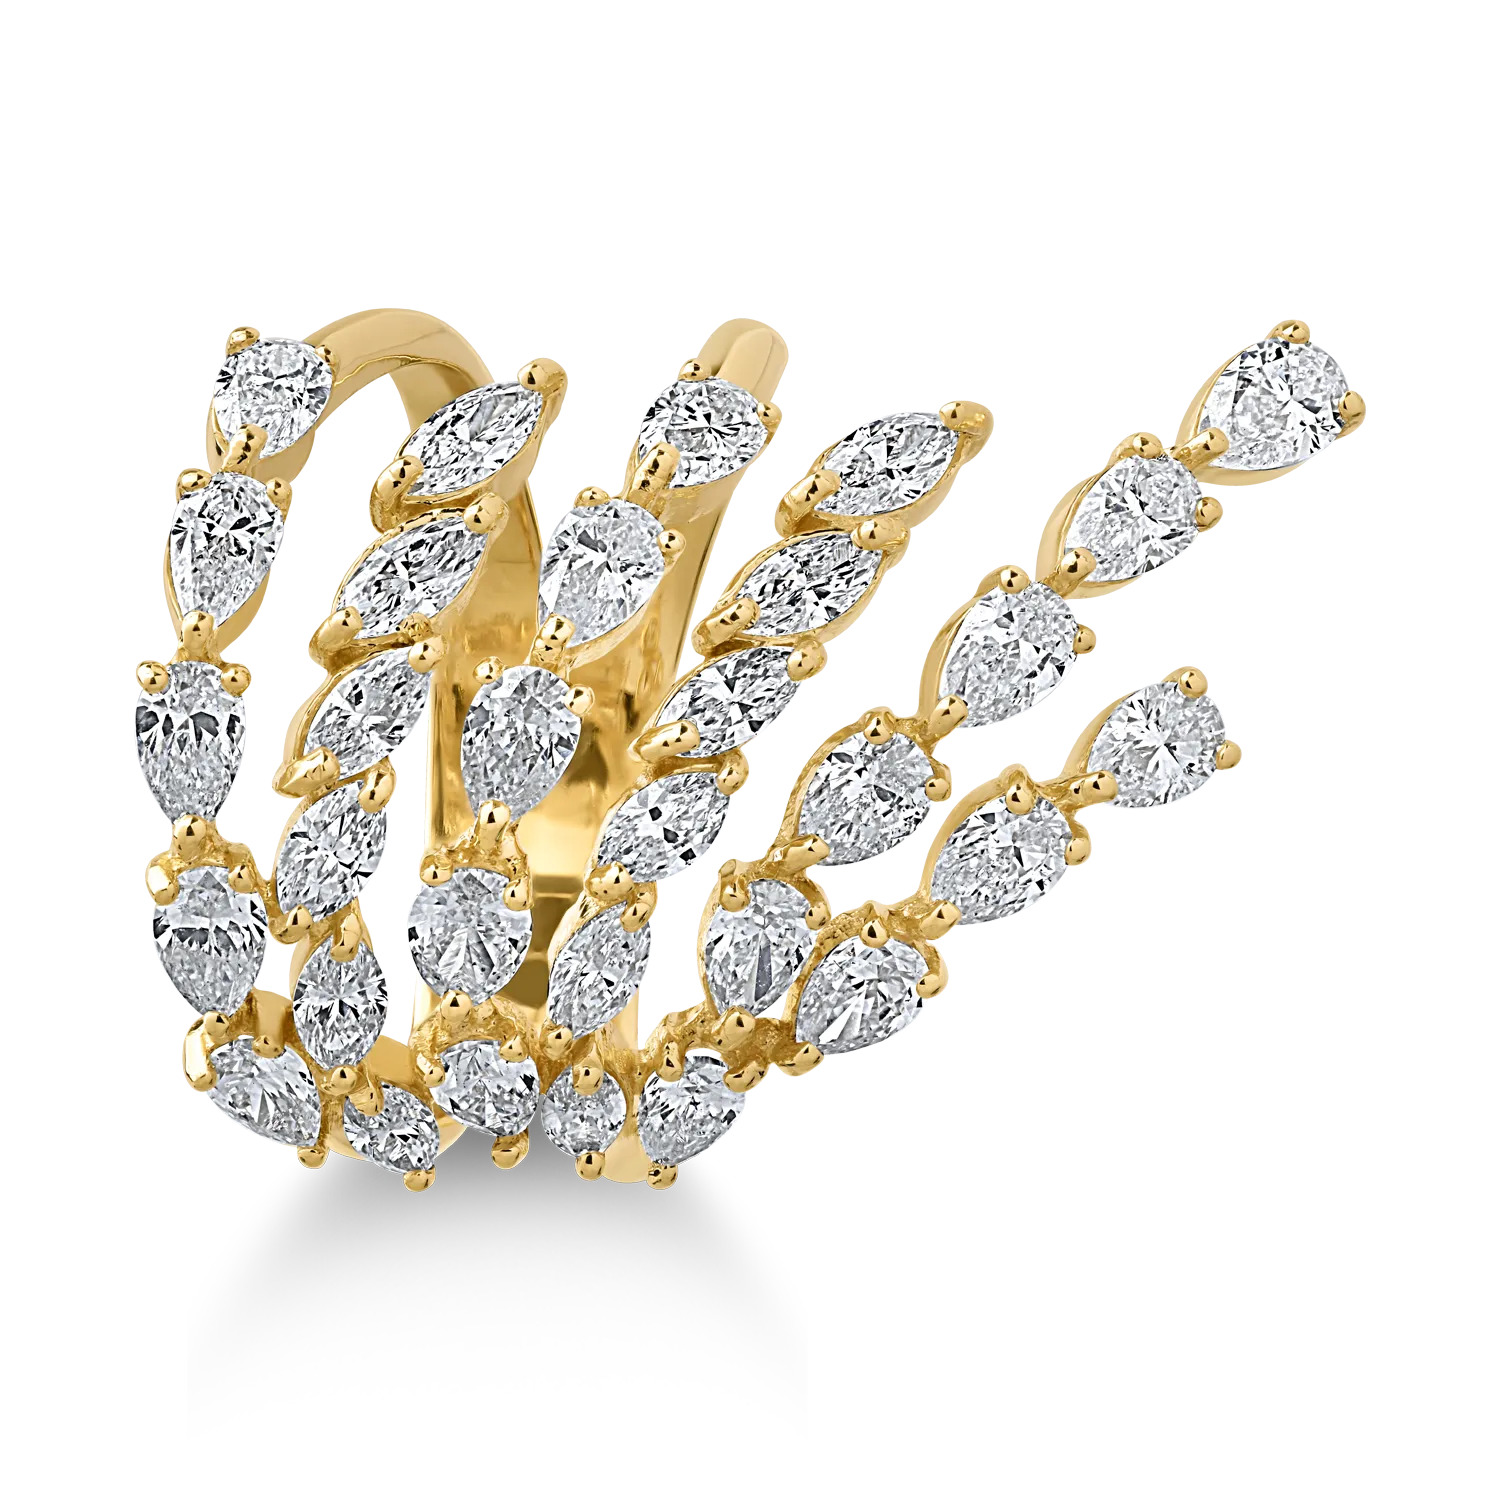 18K yellow gold ring with 2.45ct diamonds